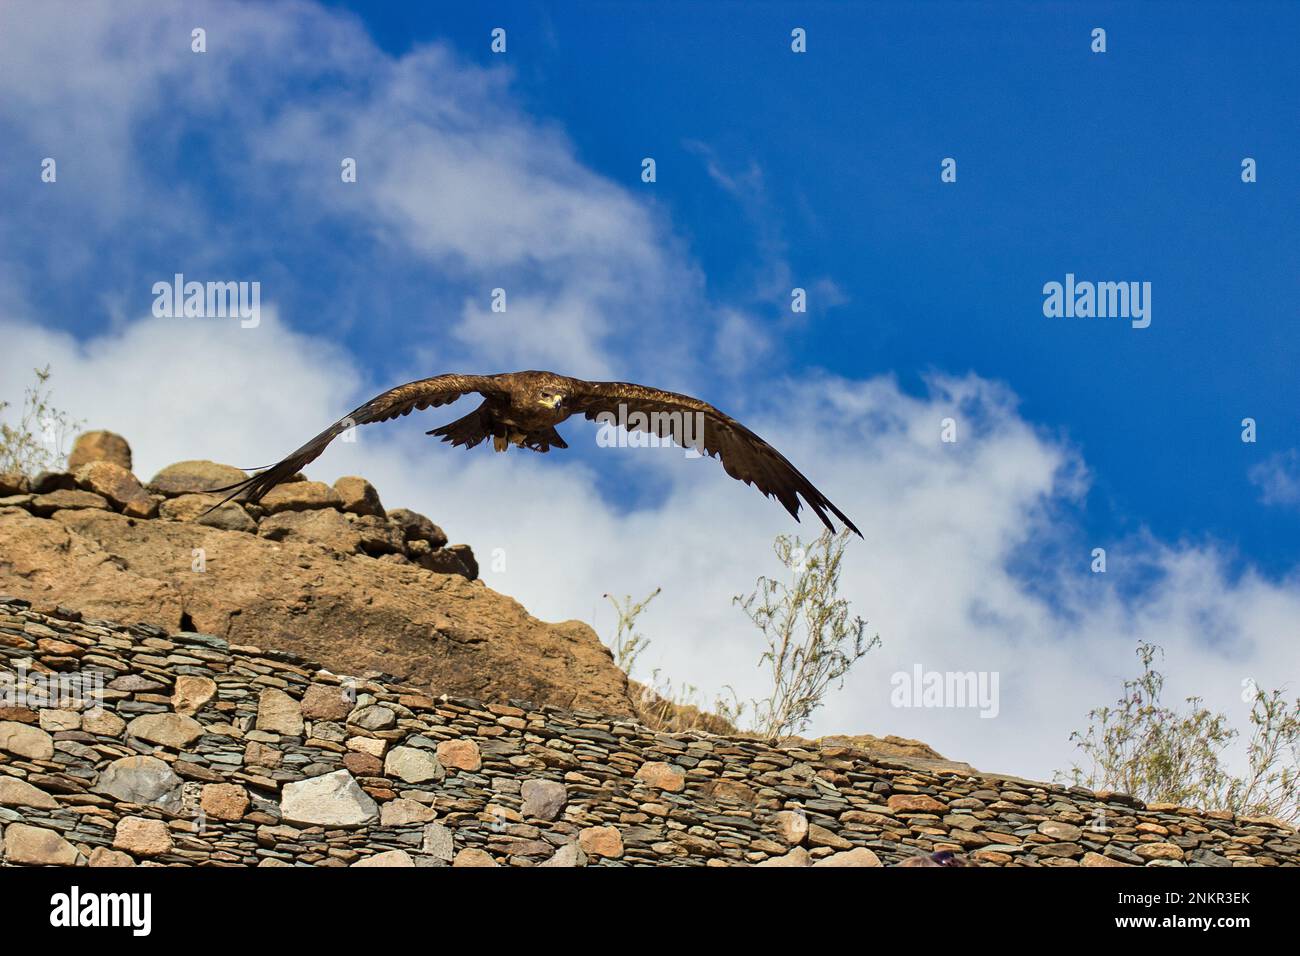 Full body shot of a falcon in flight, blue sky and a hill in the background. Stock Photo